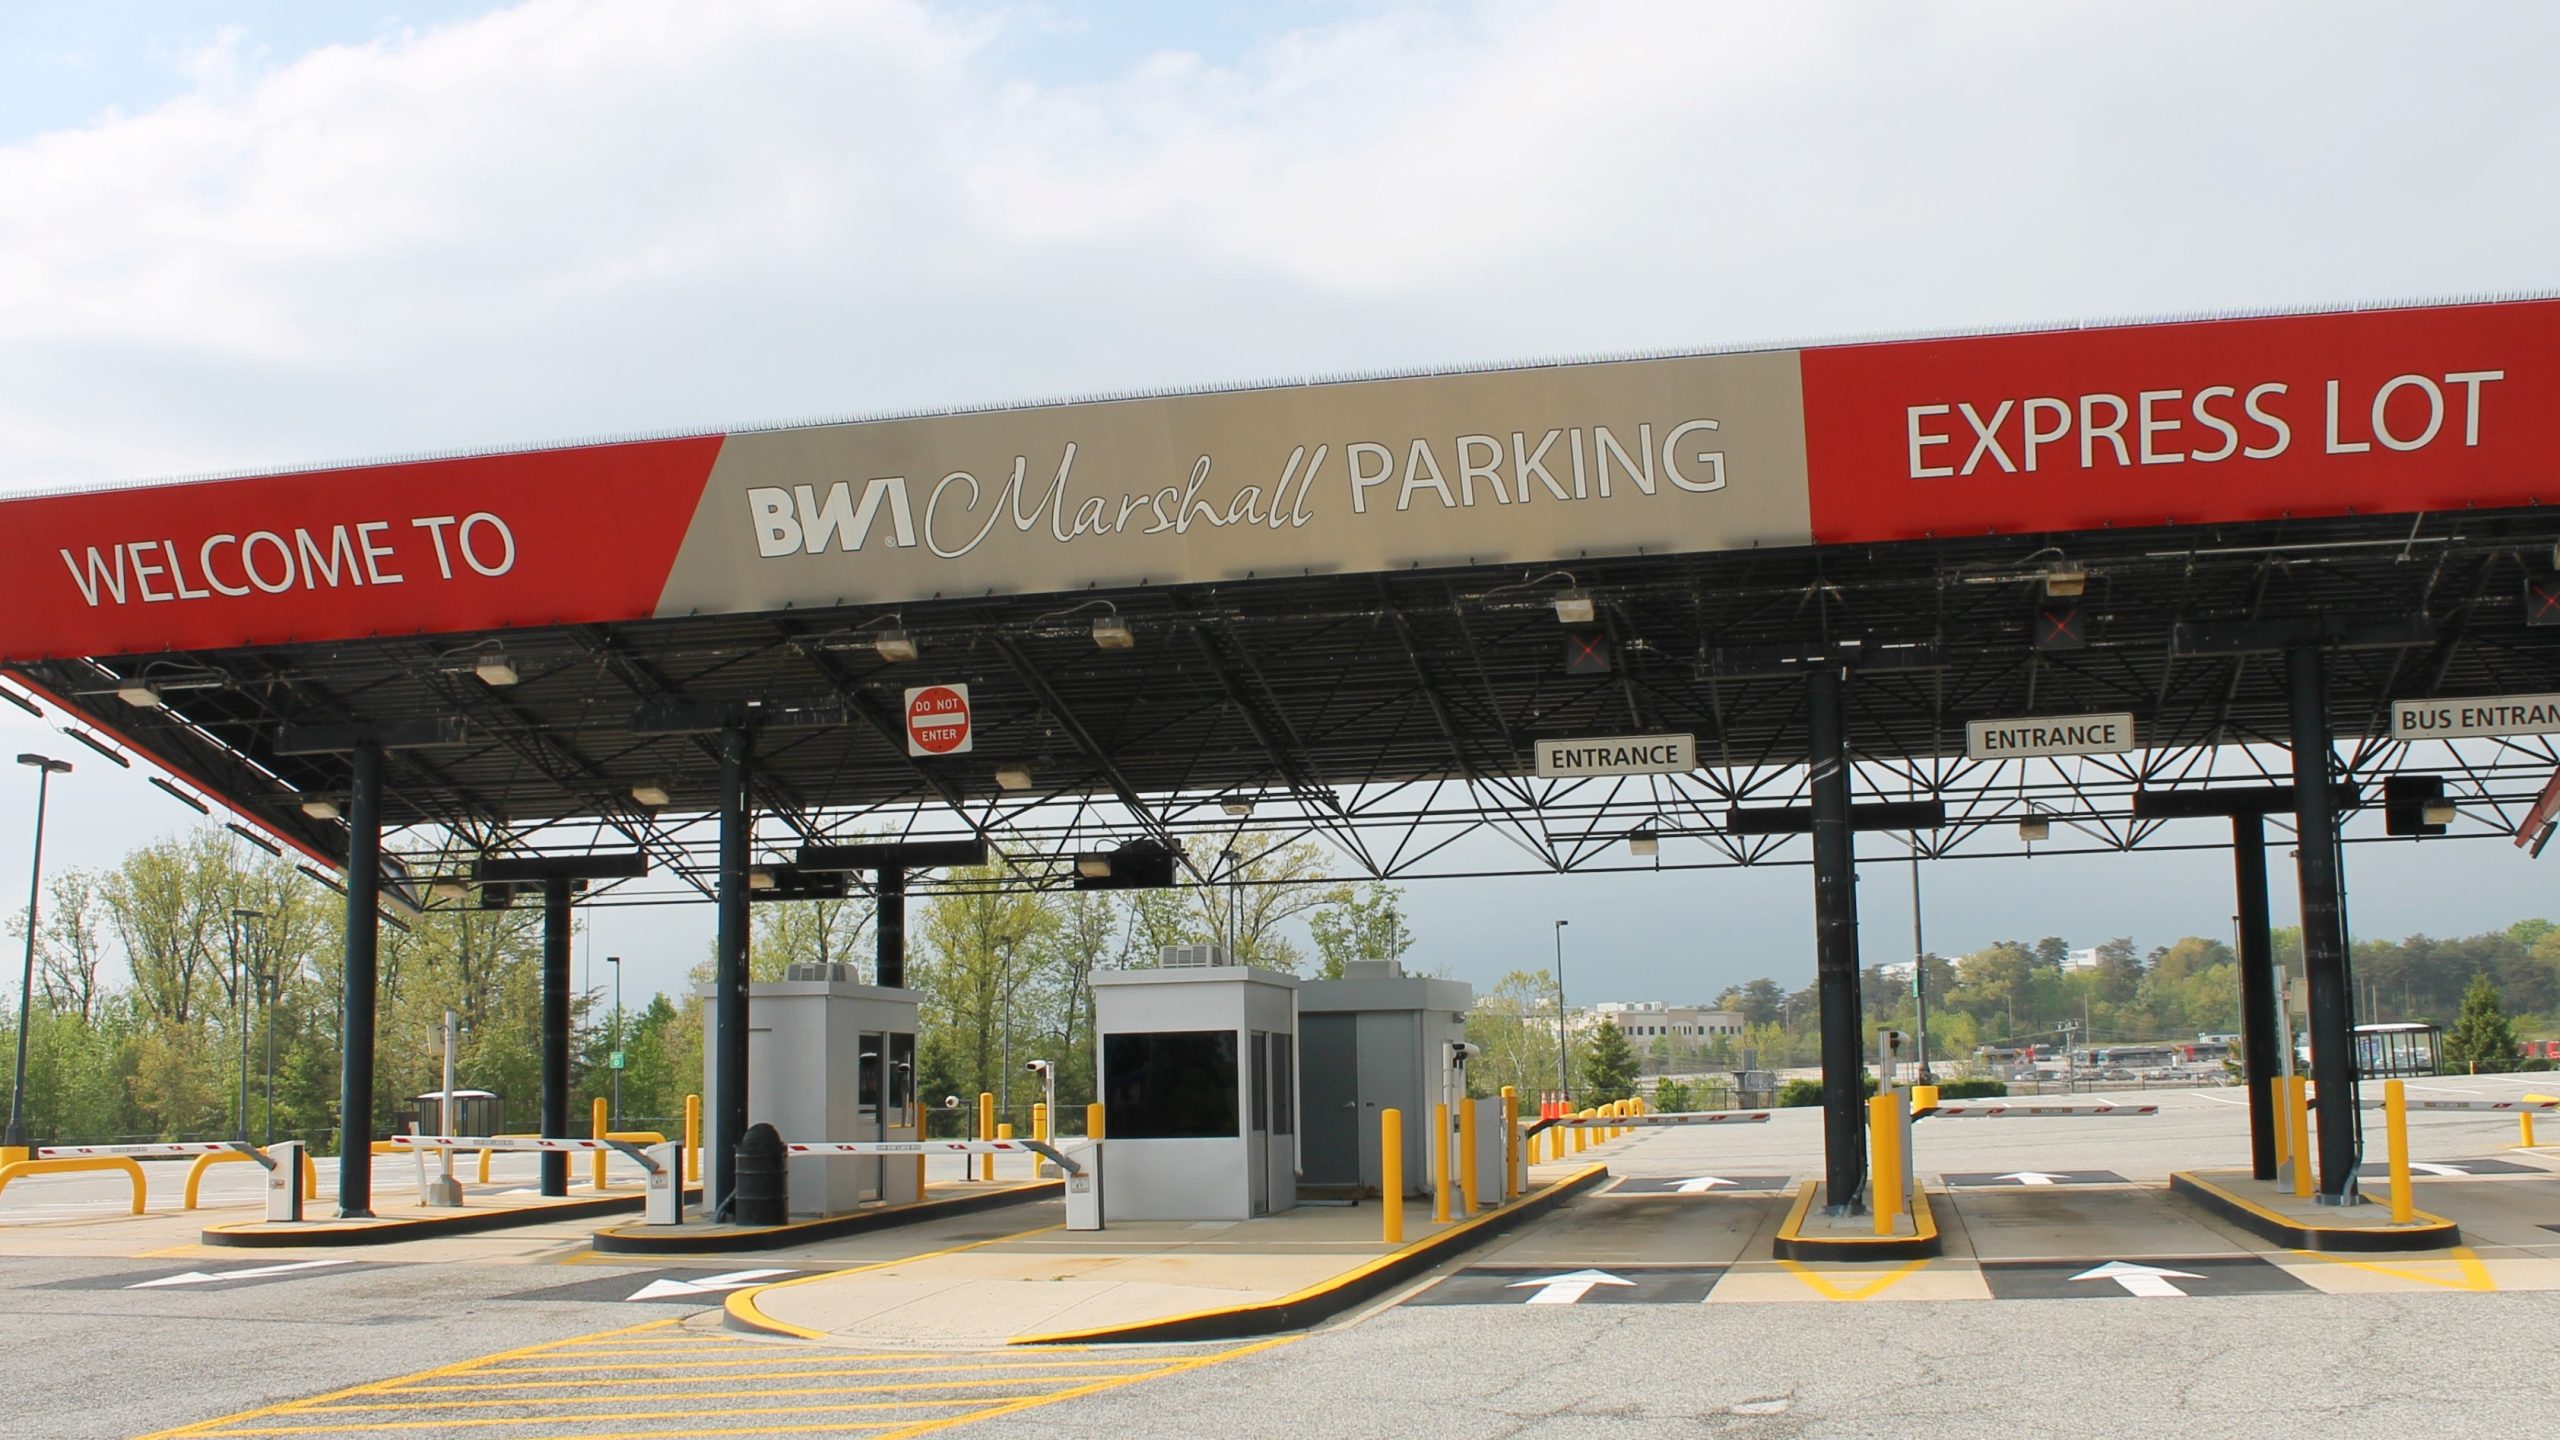 Photo of the entrance to the Express Lot at BWI Marshall Airport